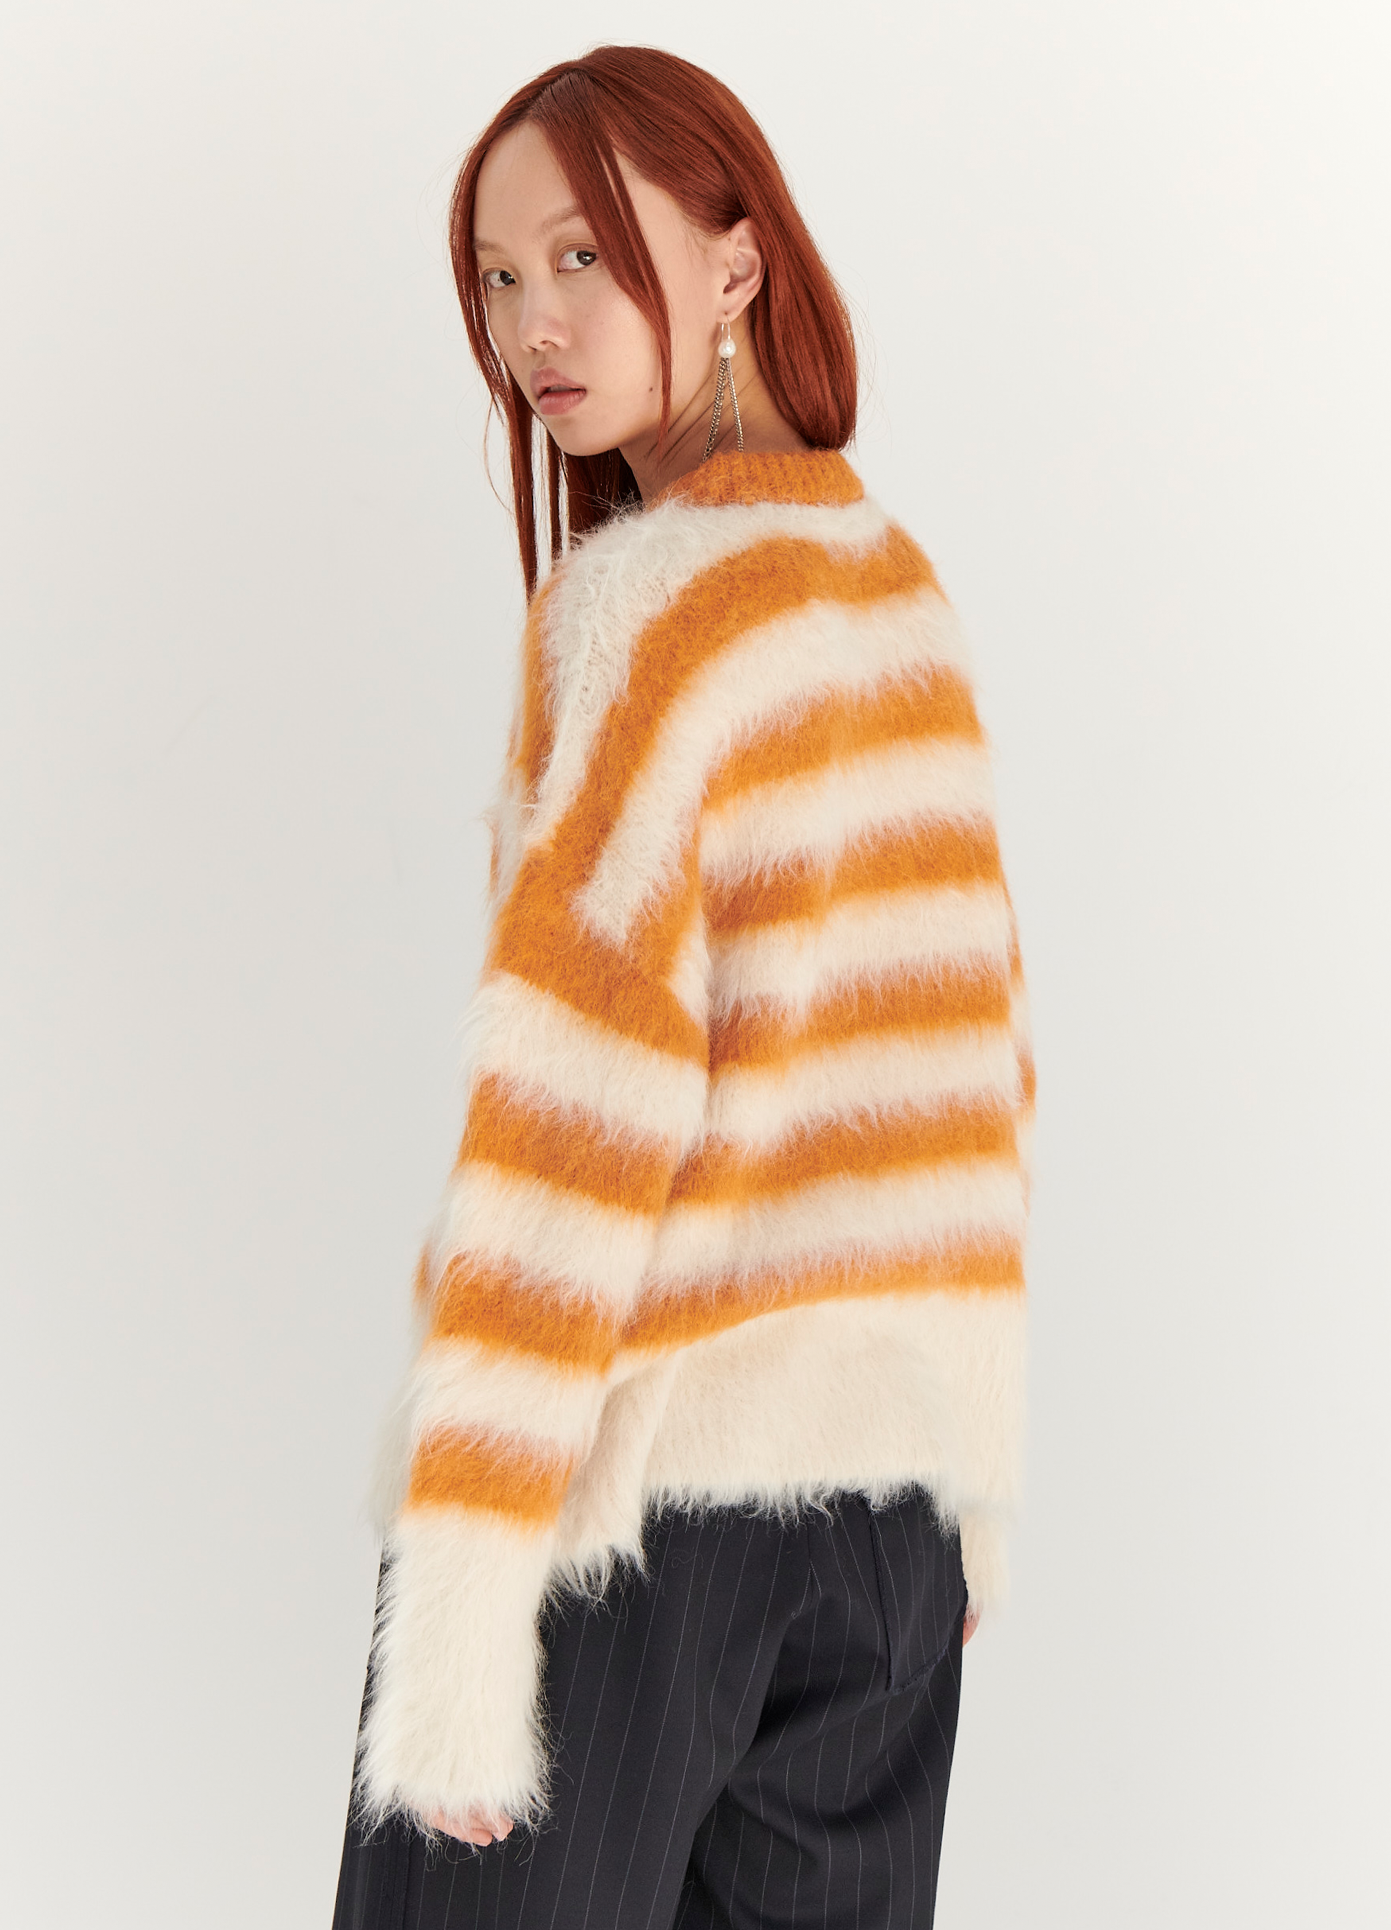 MONSE Striped Alpaca Sweater in White and Orange on model back view